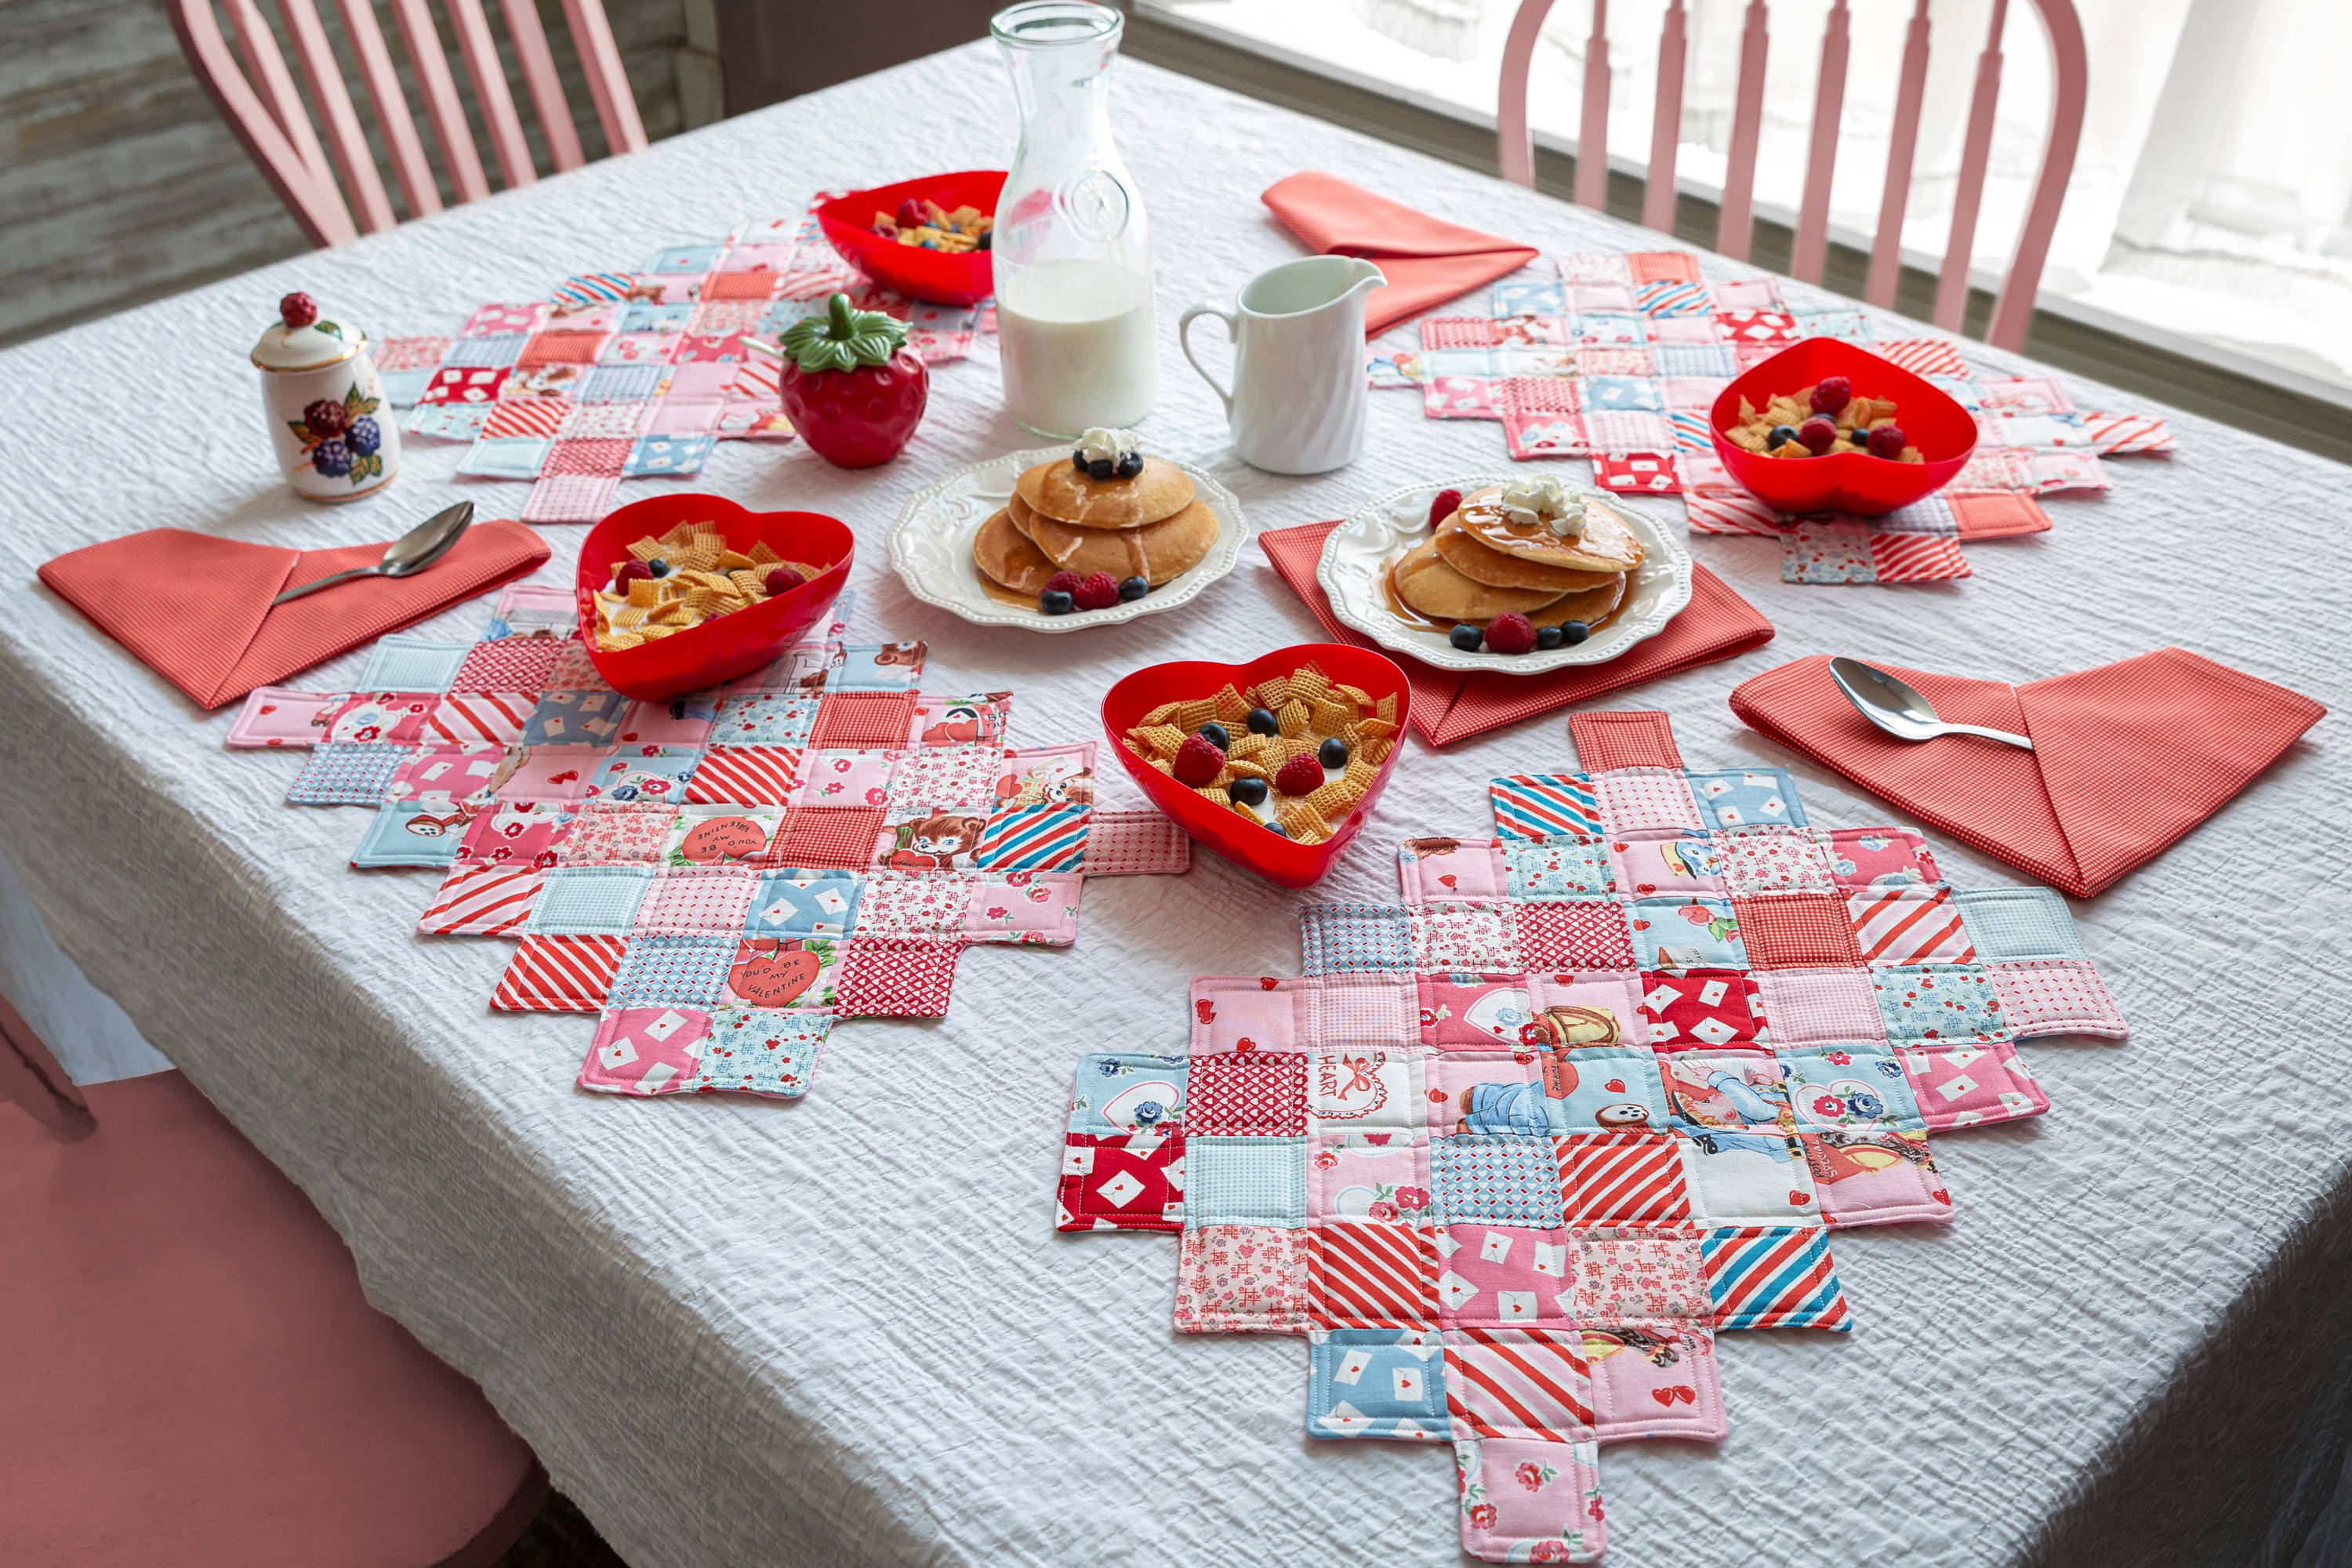 DIY Valentine's day decor placemat and napkin sewing project